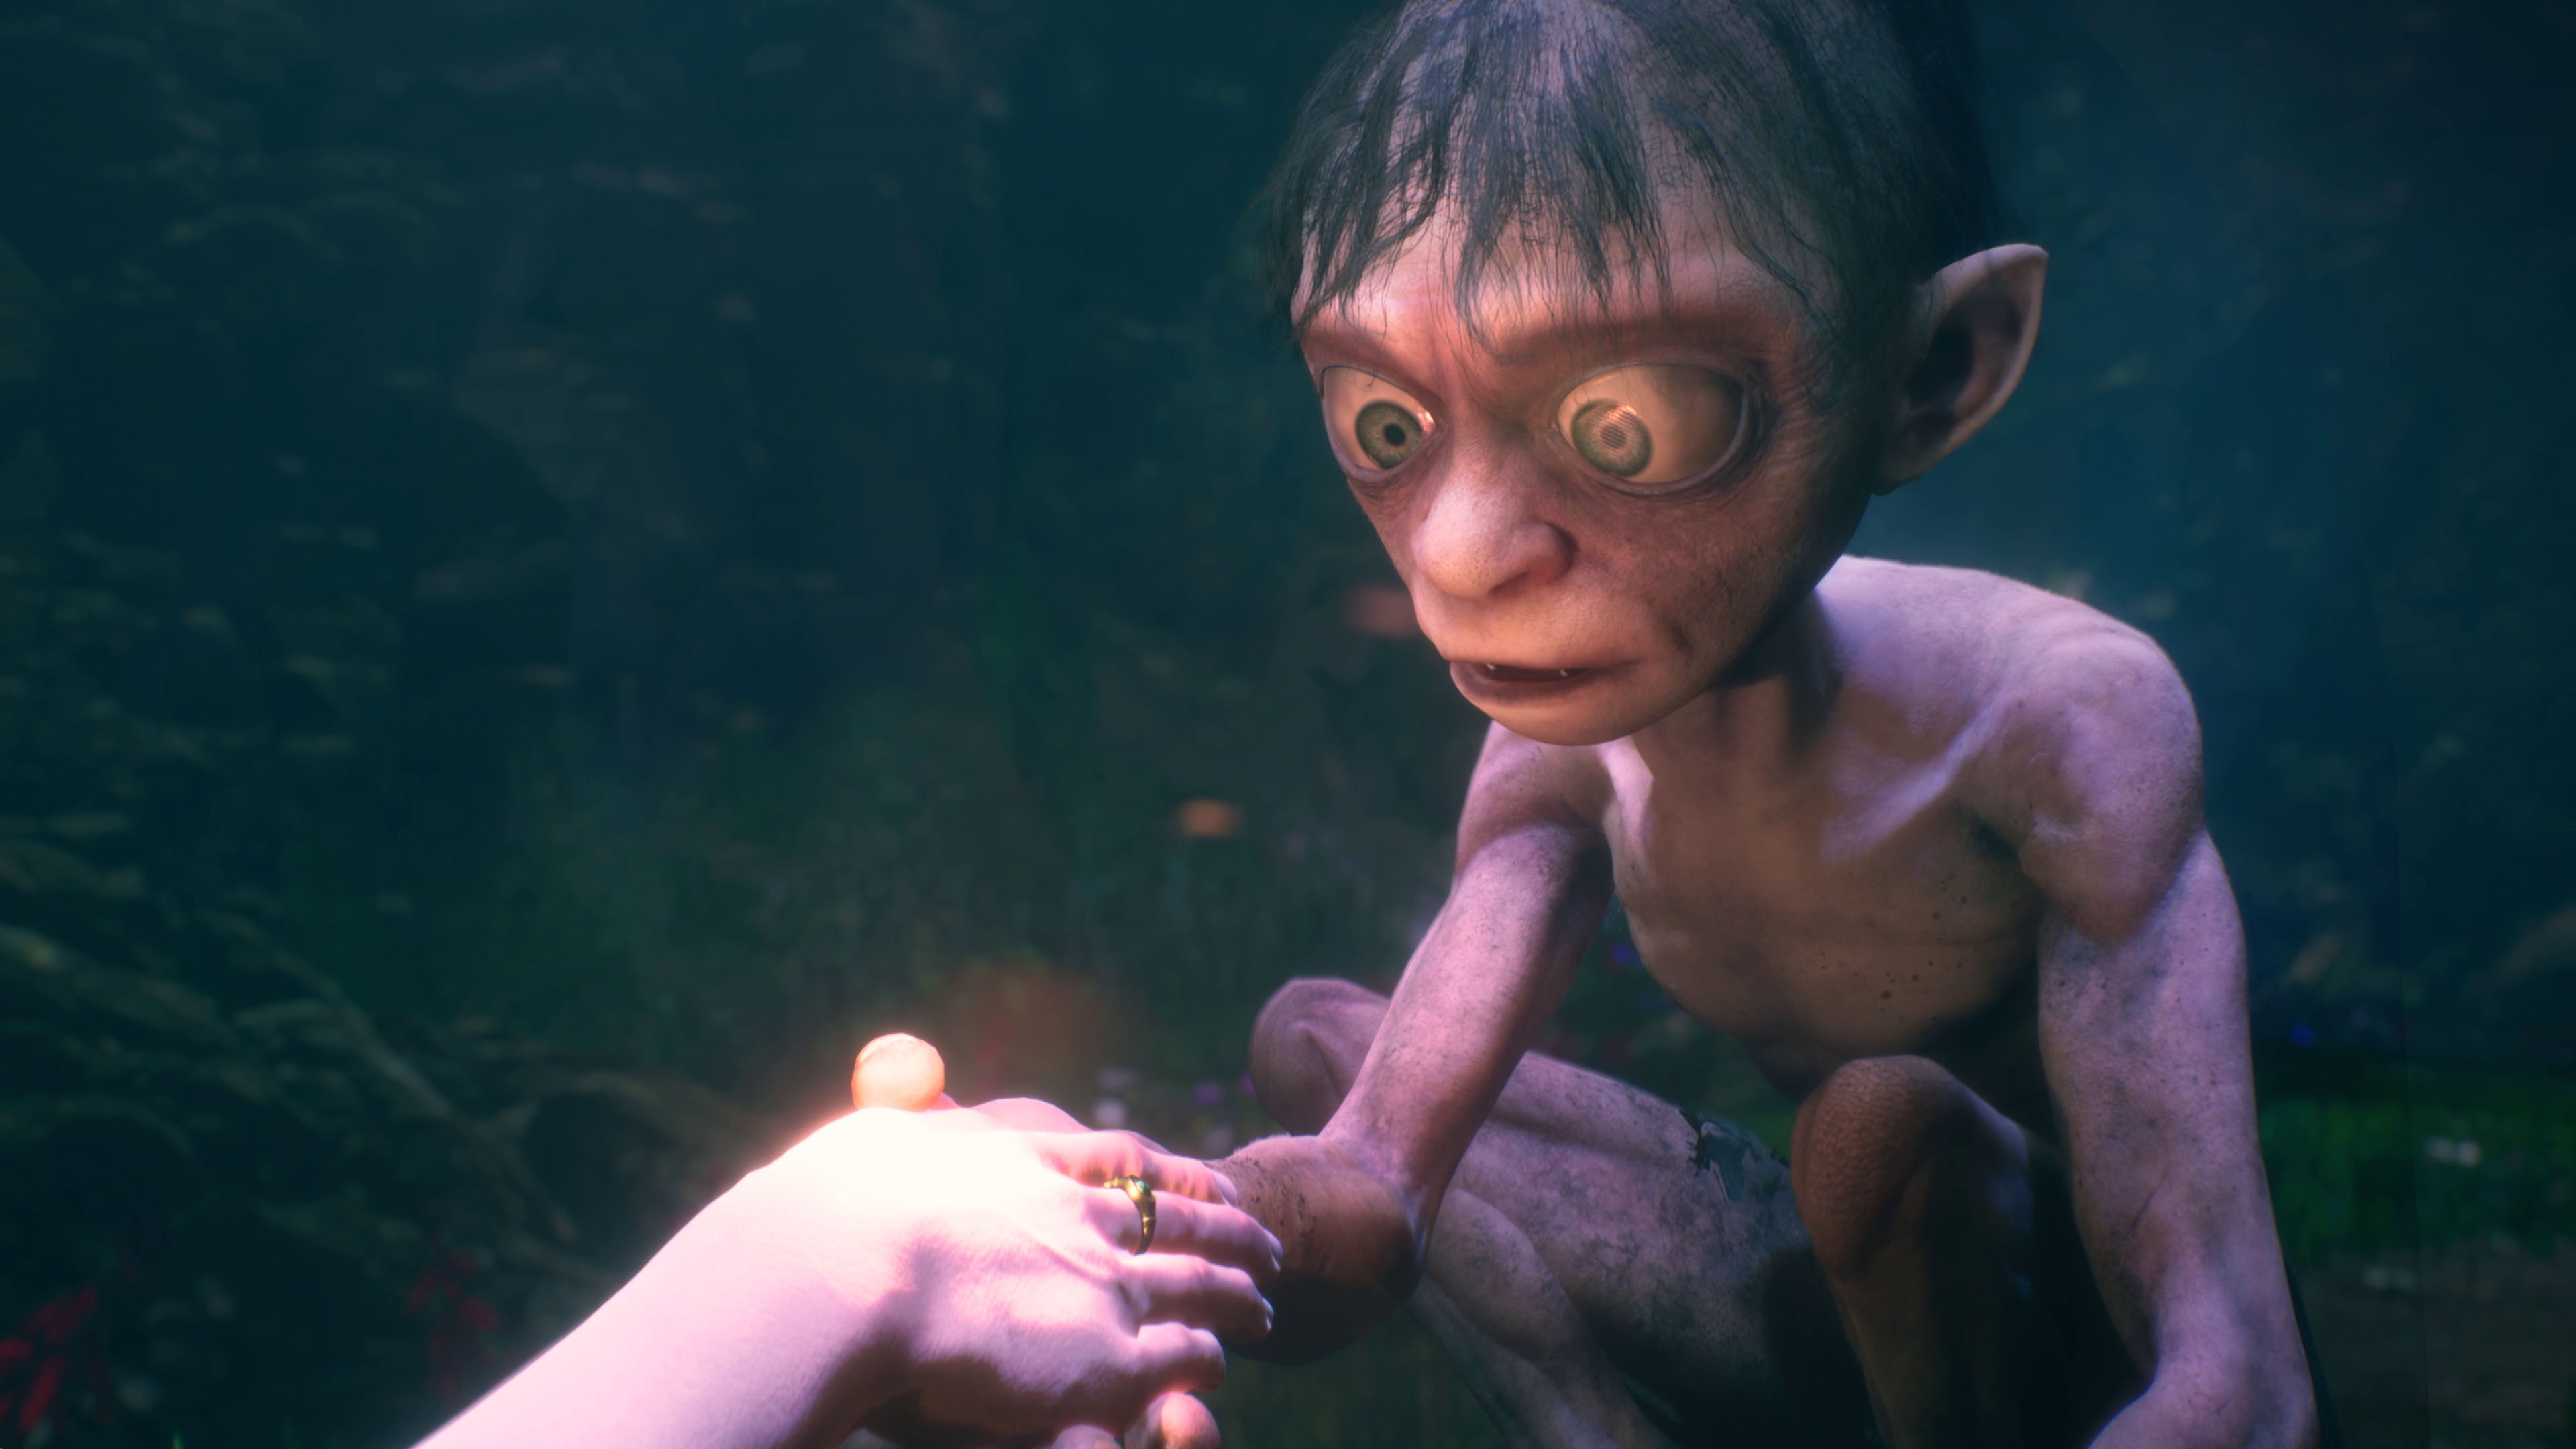 The Lord of the Rings: Gollum: release date, trailers, gameplay